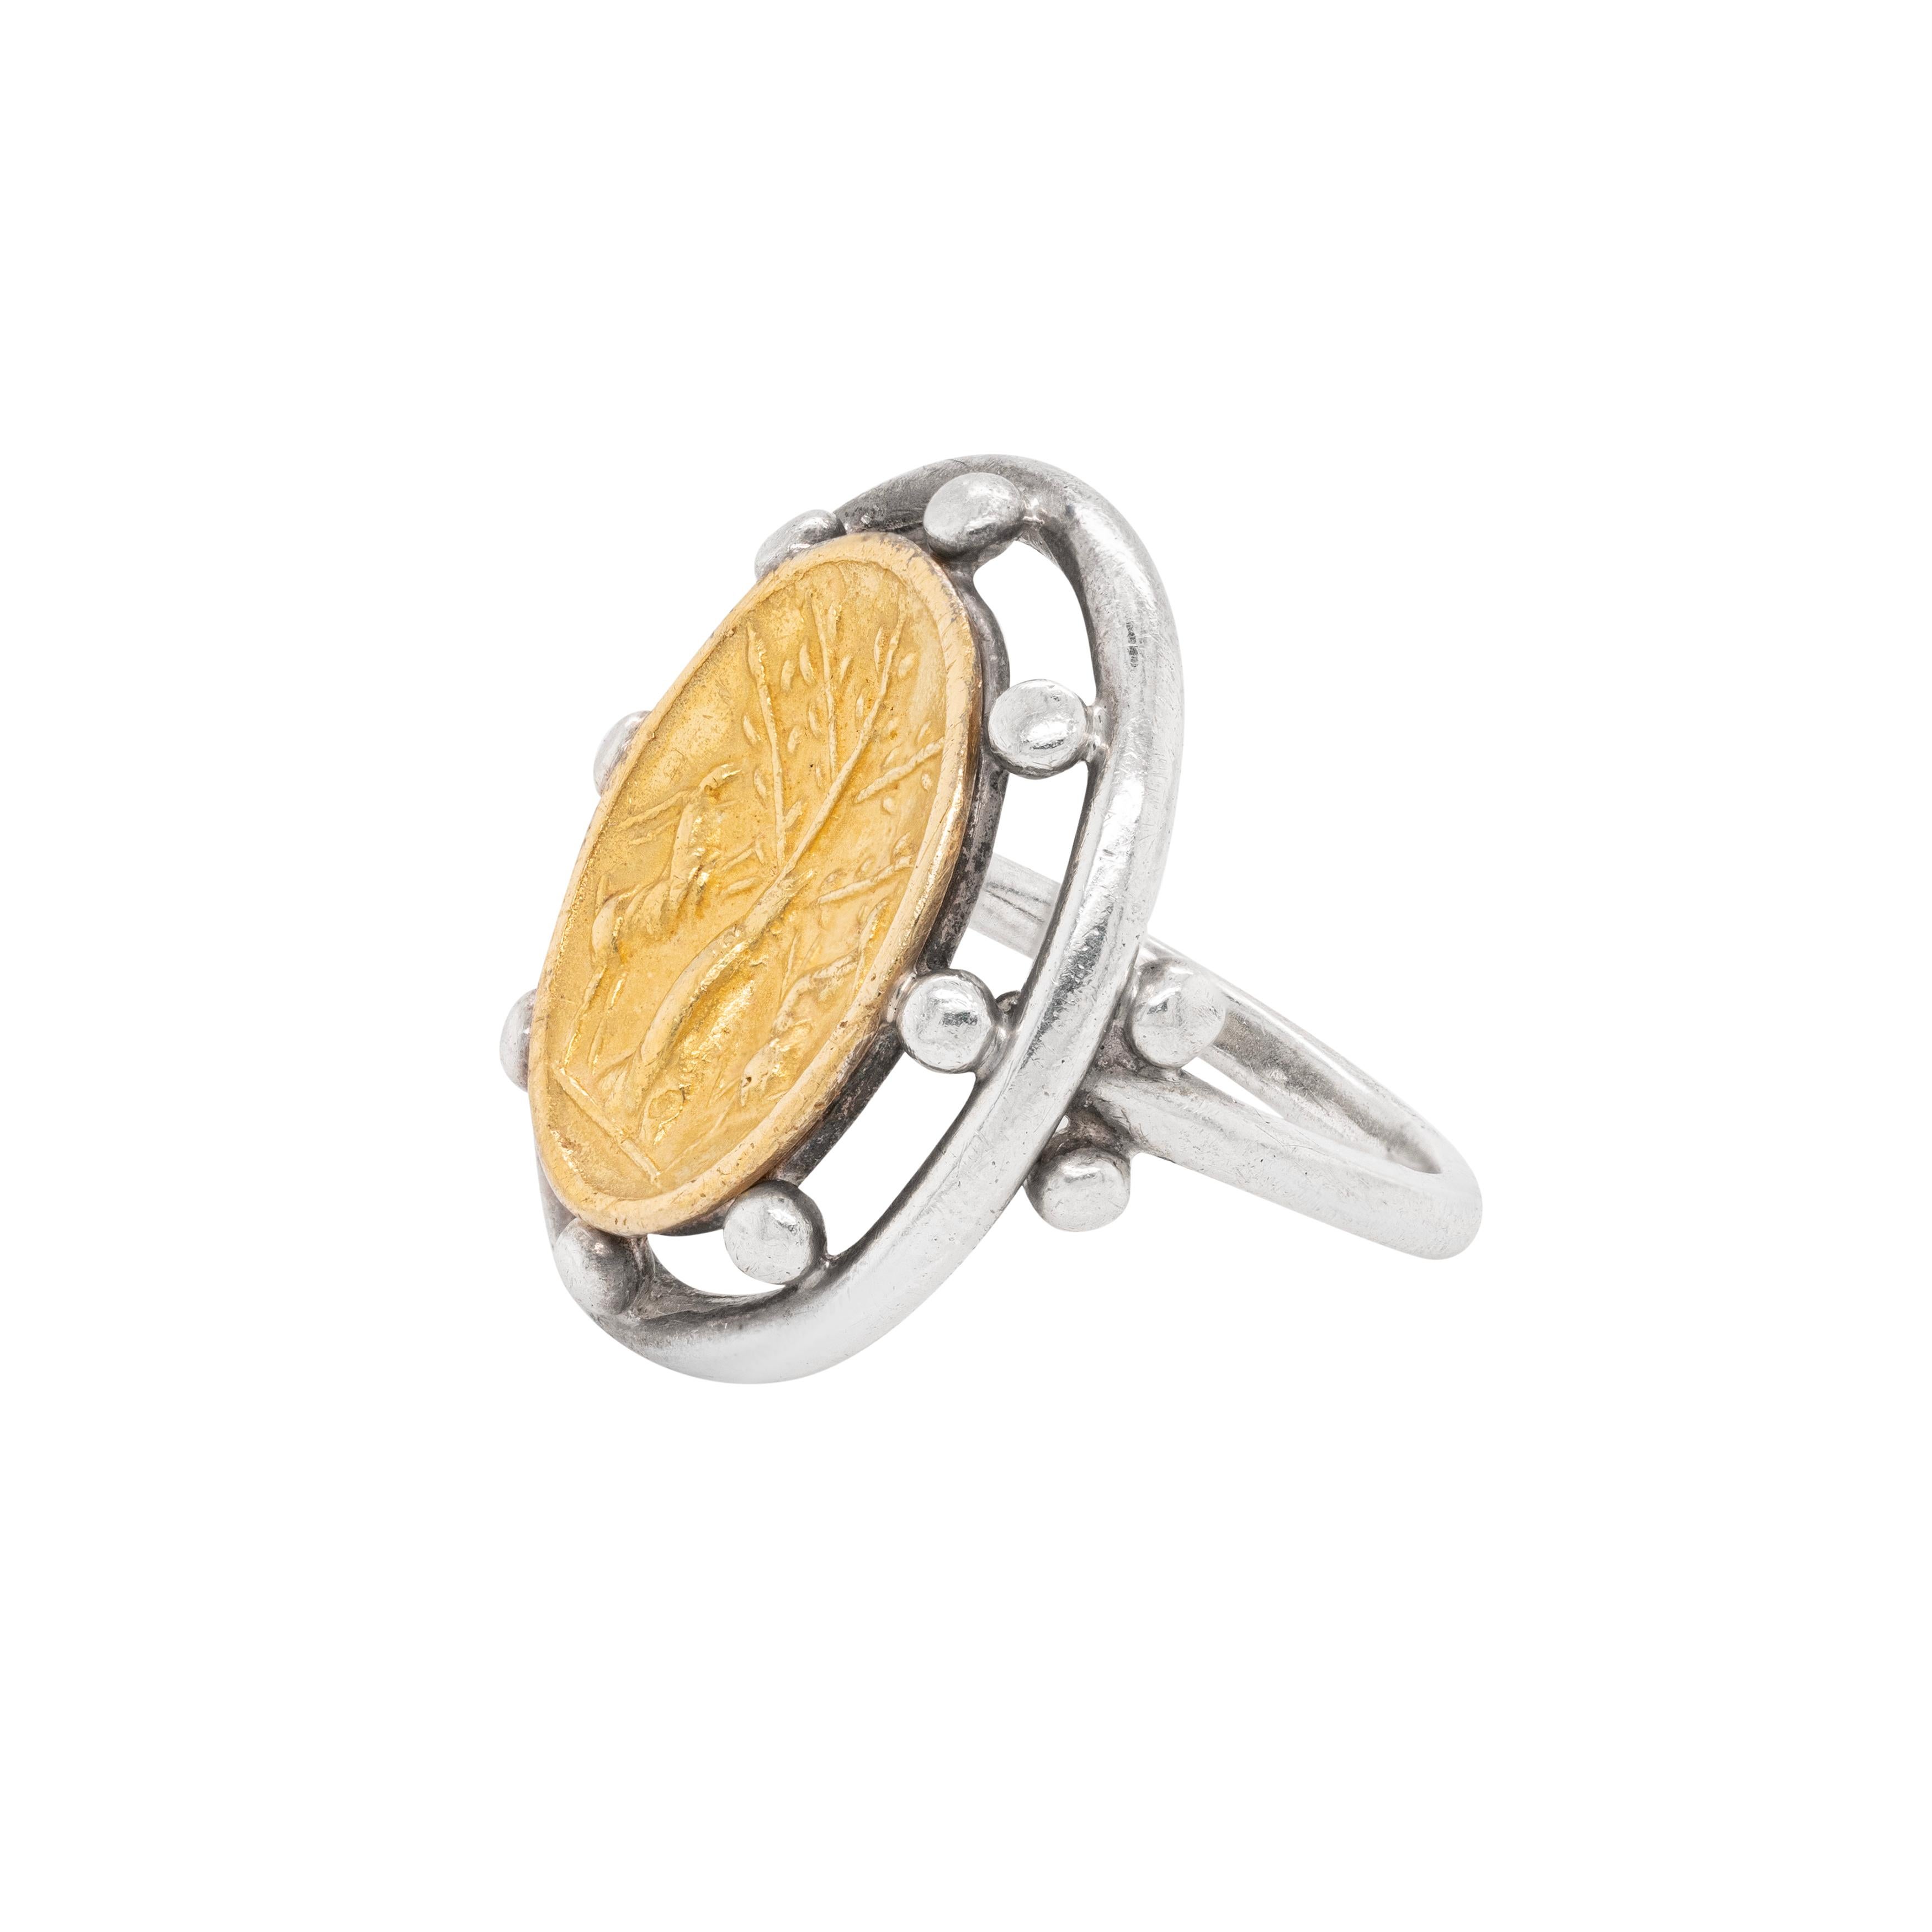 This gorgeous ring by famous designer Helen Woodhull showcases an open work design centred with a 22 carat yellow gold oval shaped intaglio depicting an antelope and tree scene. The centrepiece is beautifully connected to the sterling silver mount